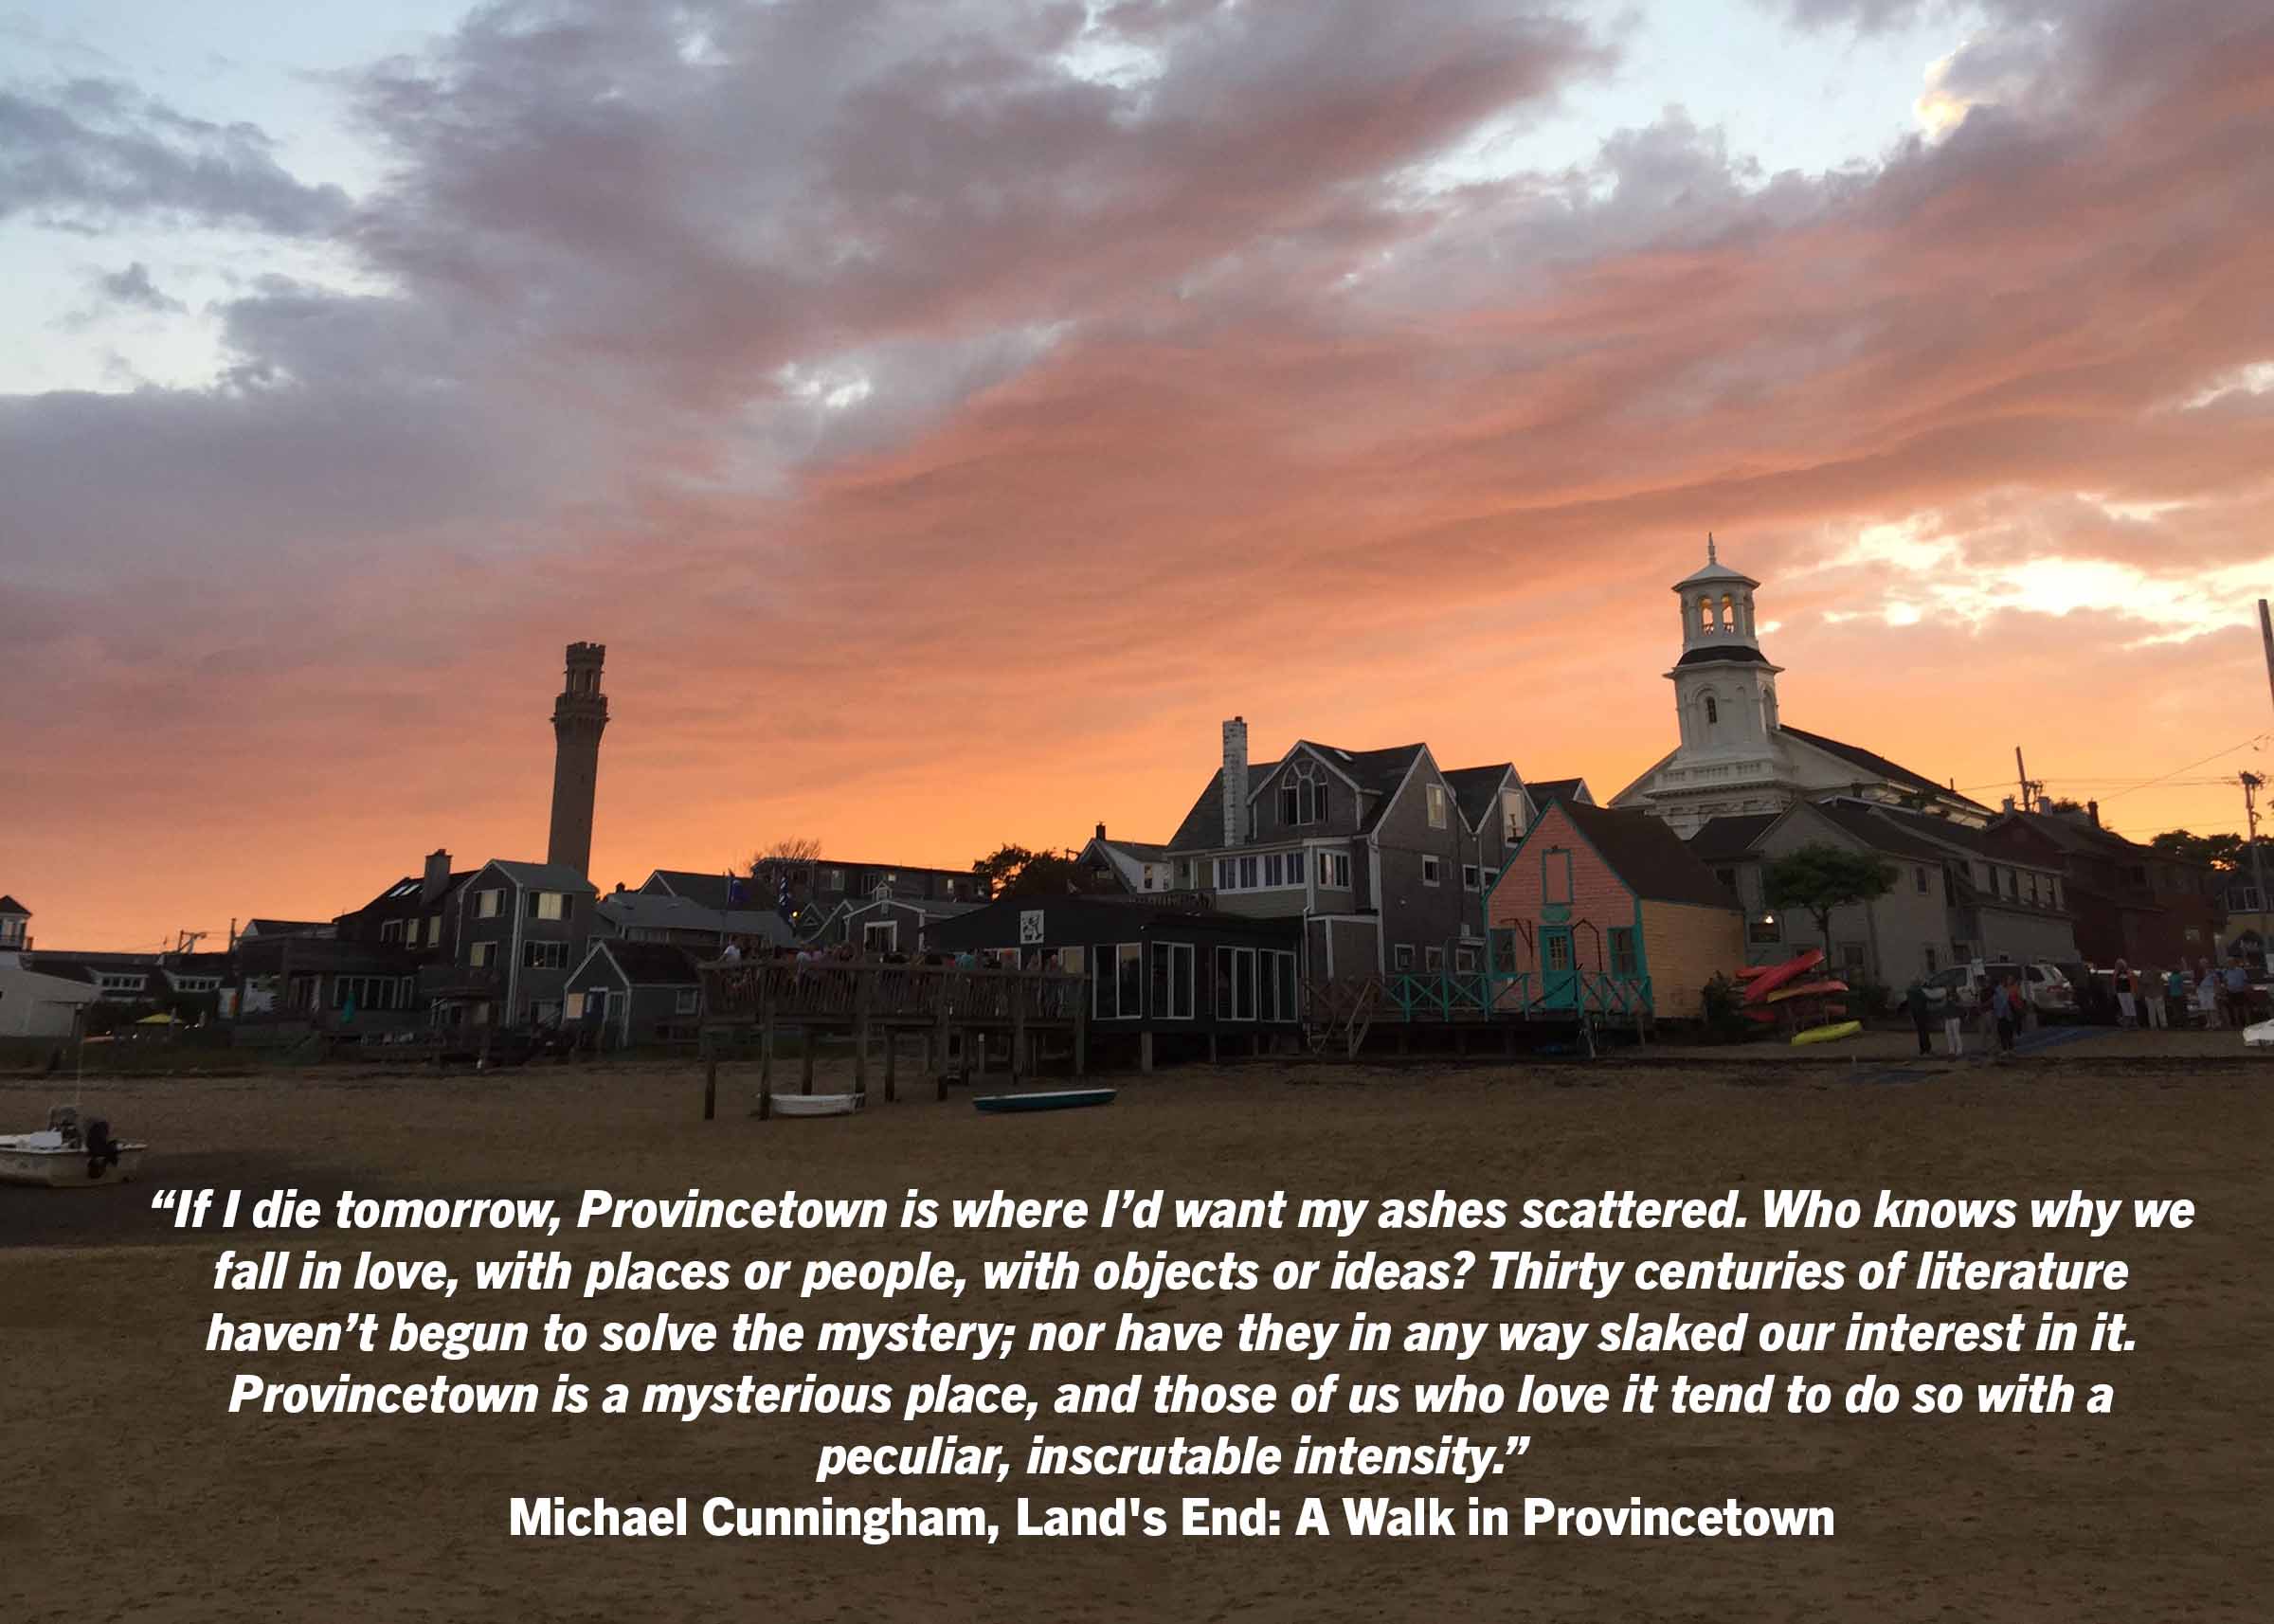 sunset view in provincetown Michael Cunningham quote "land's end: a walk in provincetown"